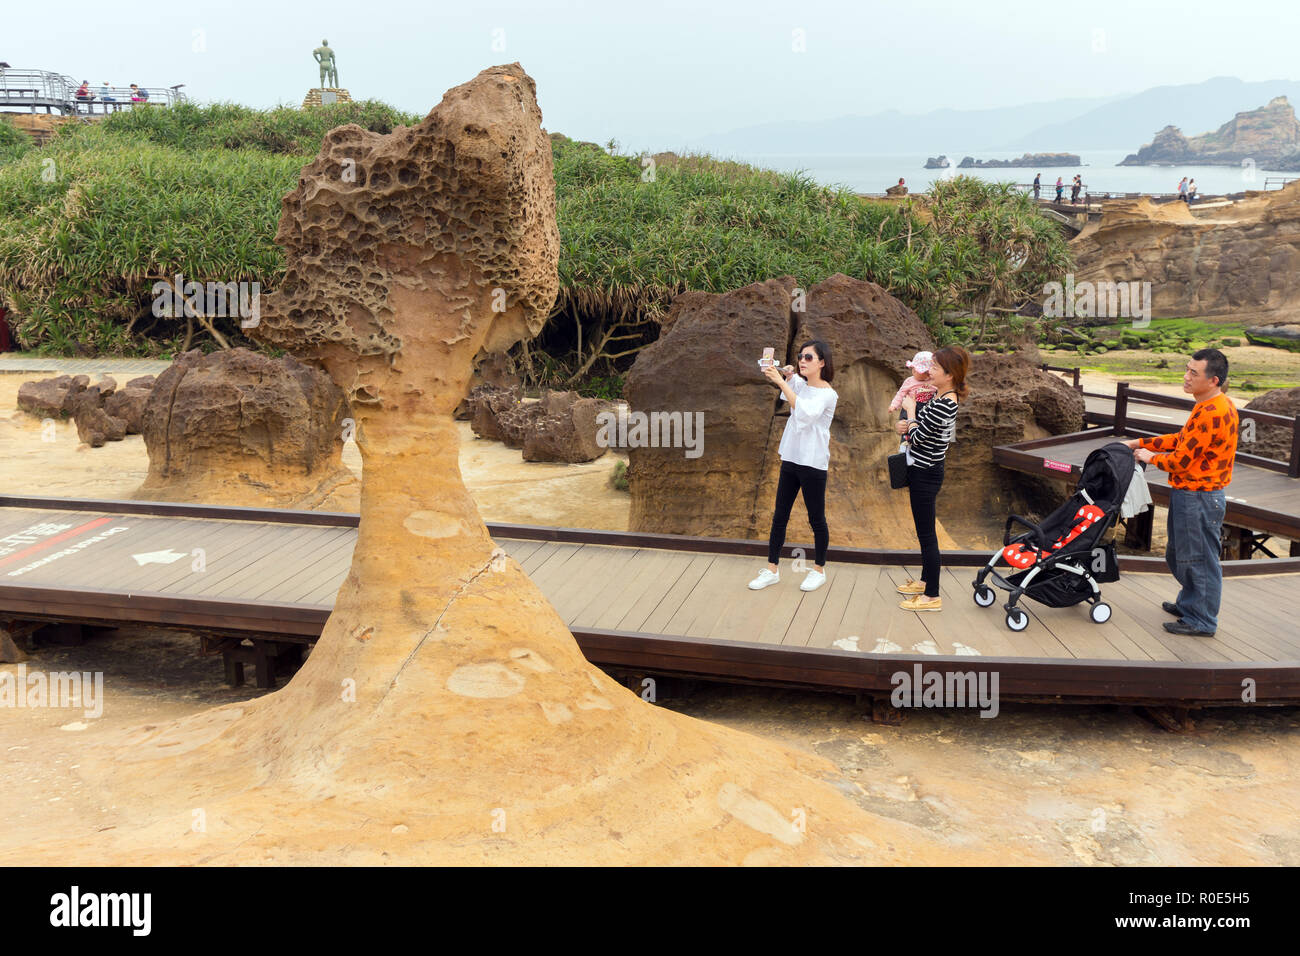 YEHLIU, TAIWAN - MARCH 30, 2017 : Some tourists are photographing an amazing geologic natural sandstone formation at the Yehliu geopark, Taiwan Stock Photo